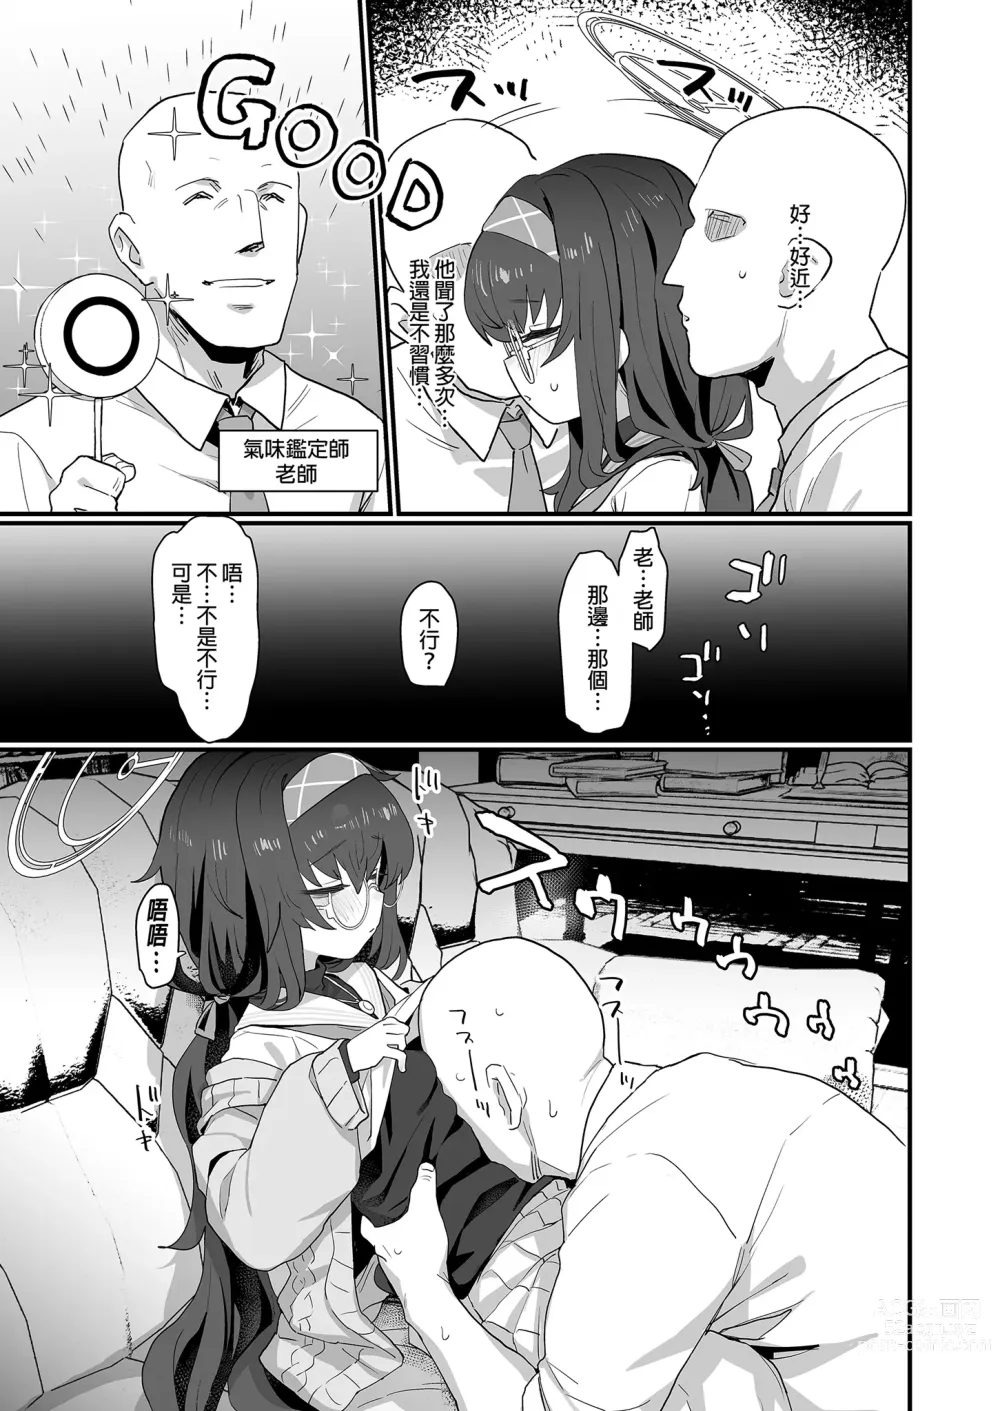 Page 5 of doujinshi 古書館願望清單 (decensored)